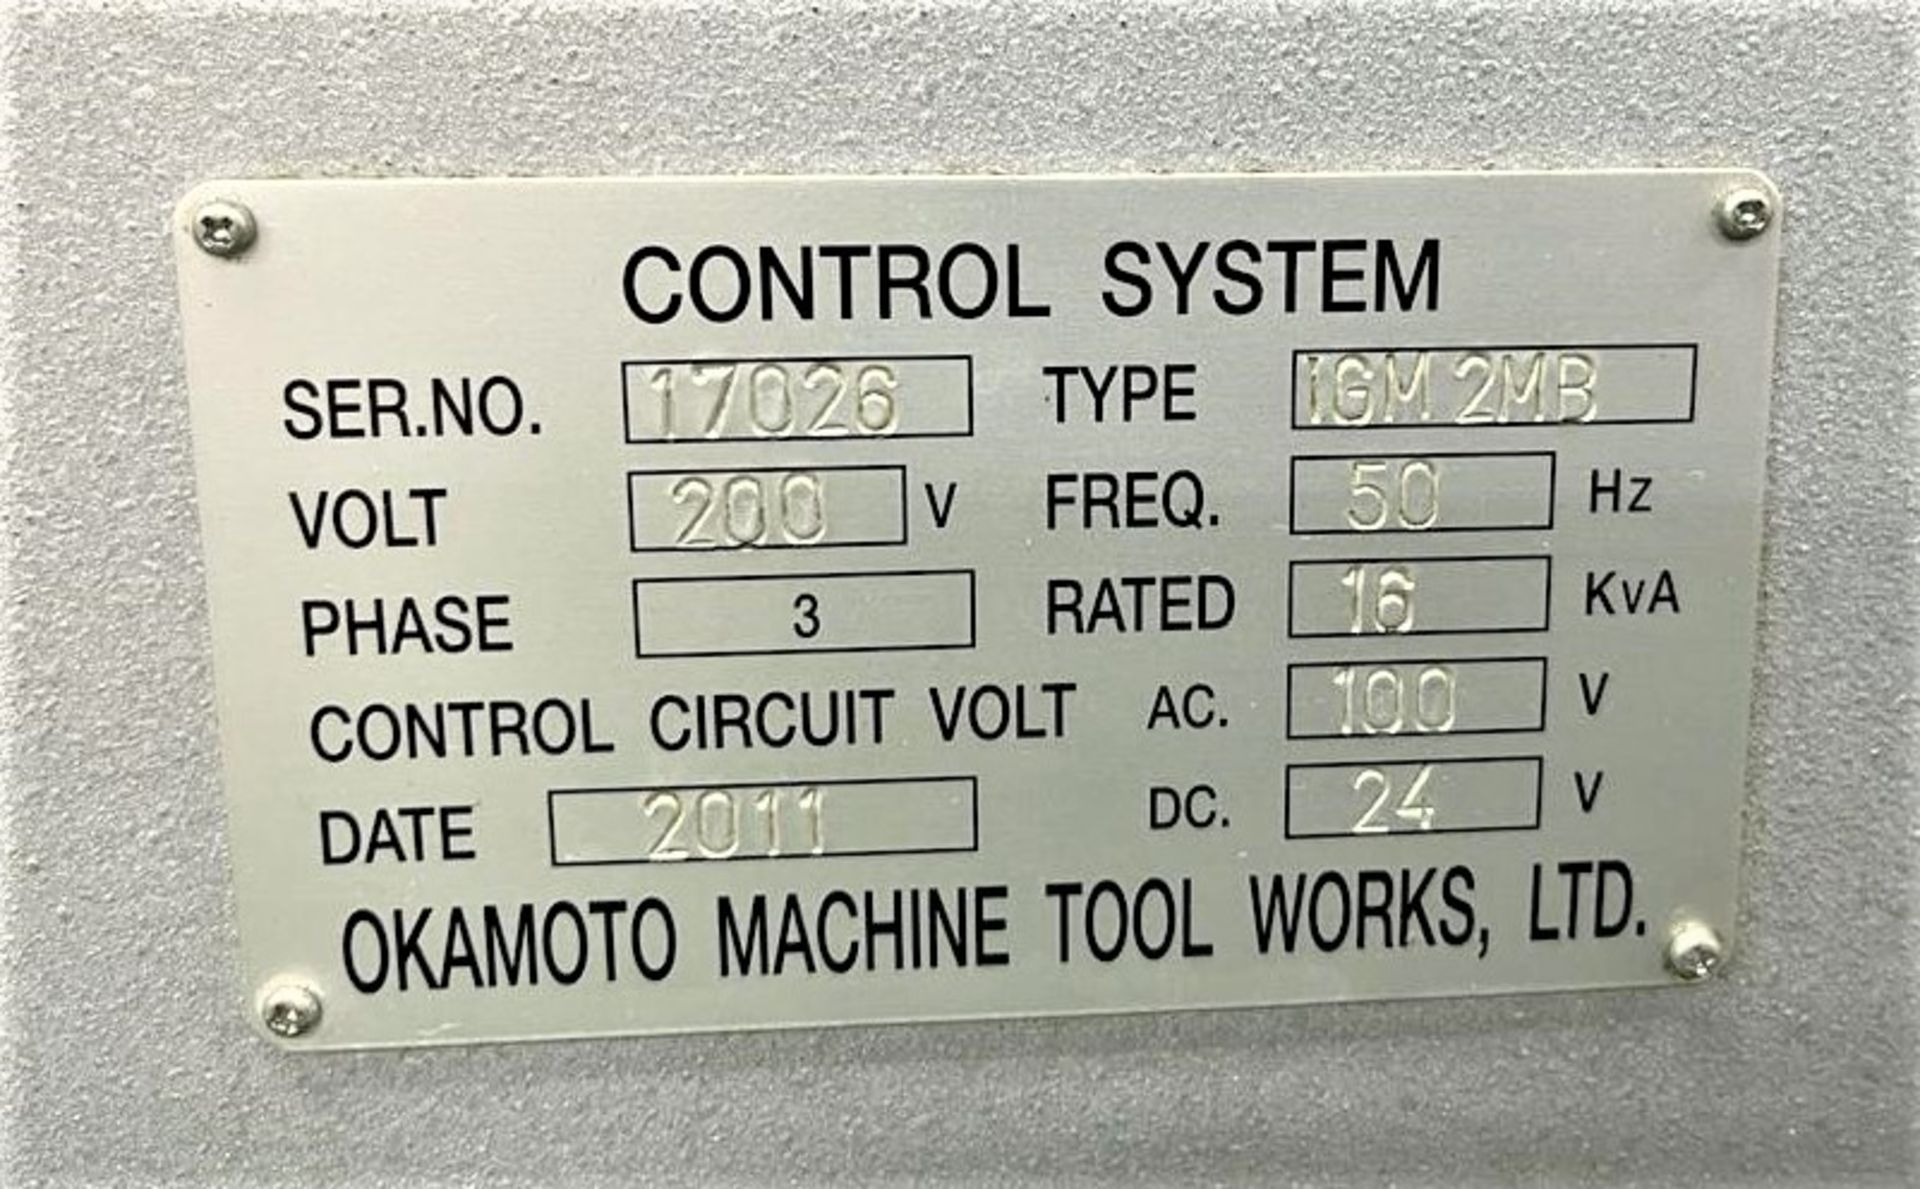 2011 OKAMOTO PRECISION INTERNAL GRINDER IGM-2MB WITH MOI CONTROL, S/N 17026 - Image 9 of 11